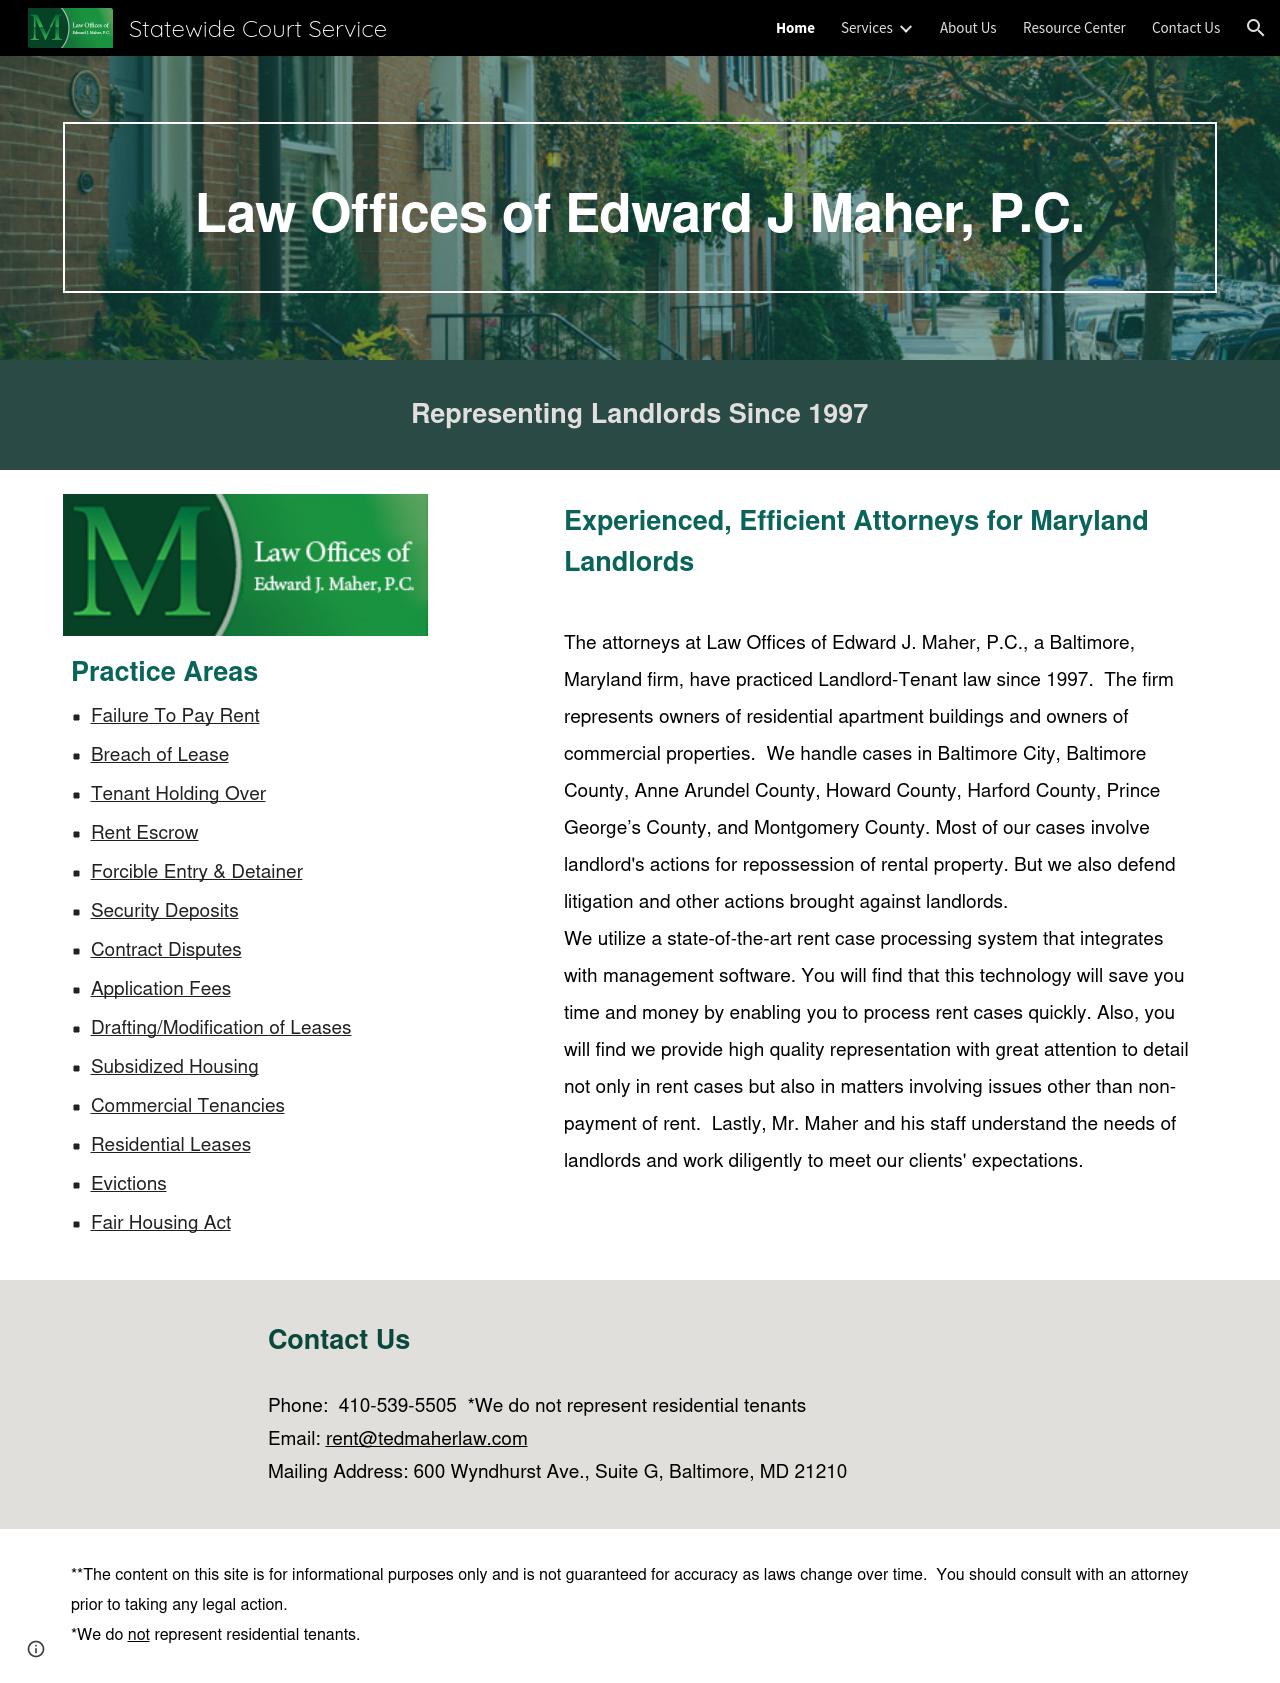 Law Offices of Edward J. Maher, P.C. - Baltimore MD Lawyers